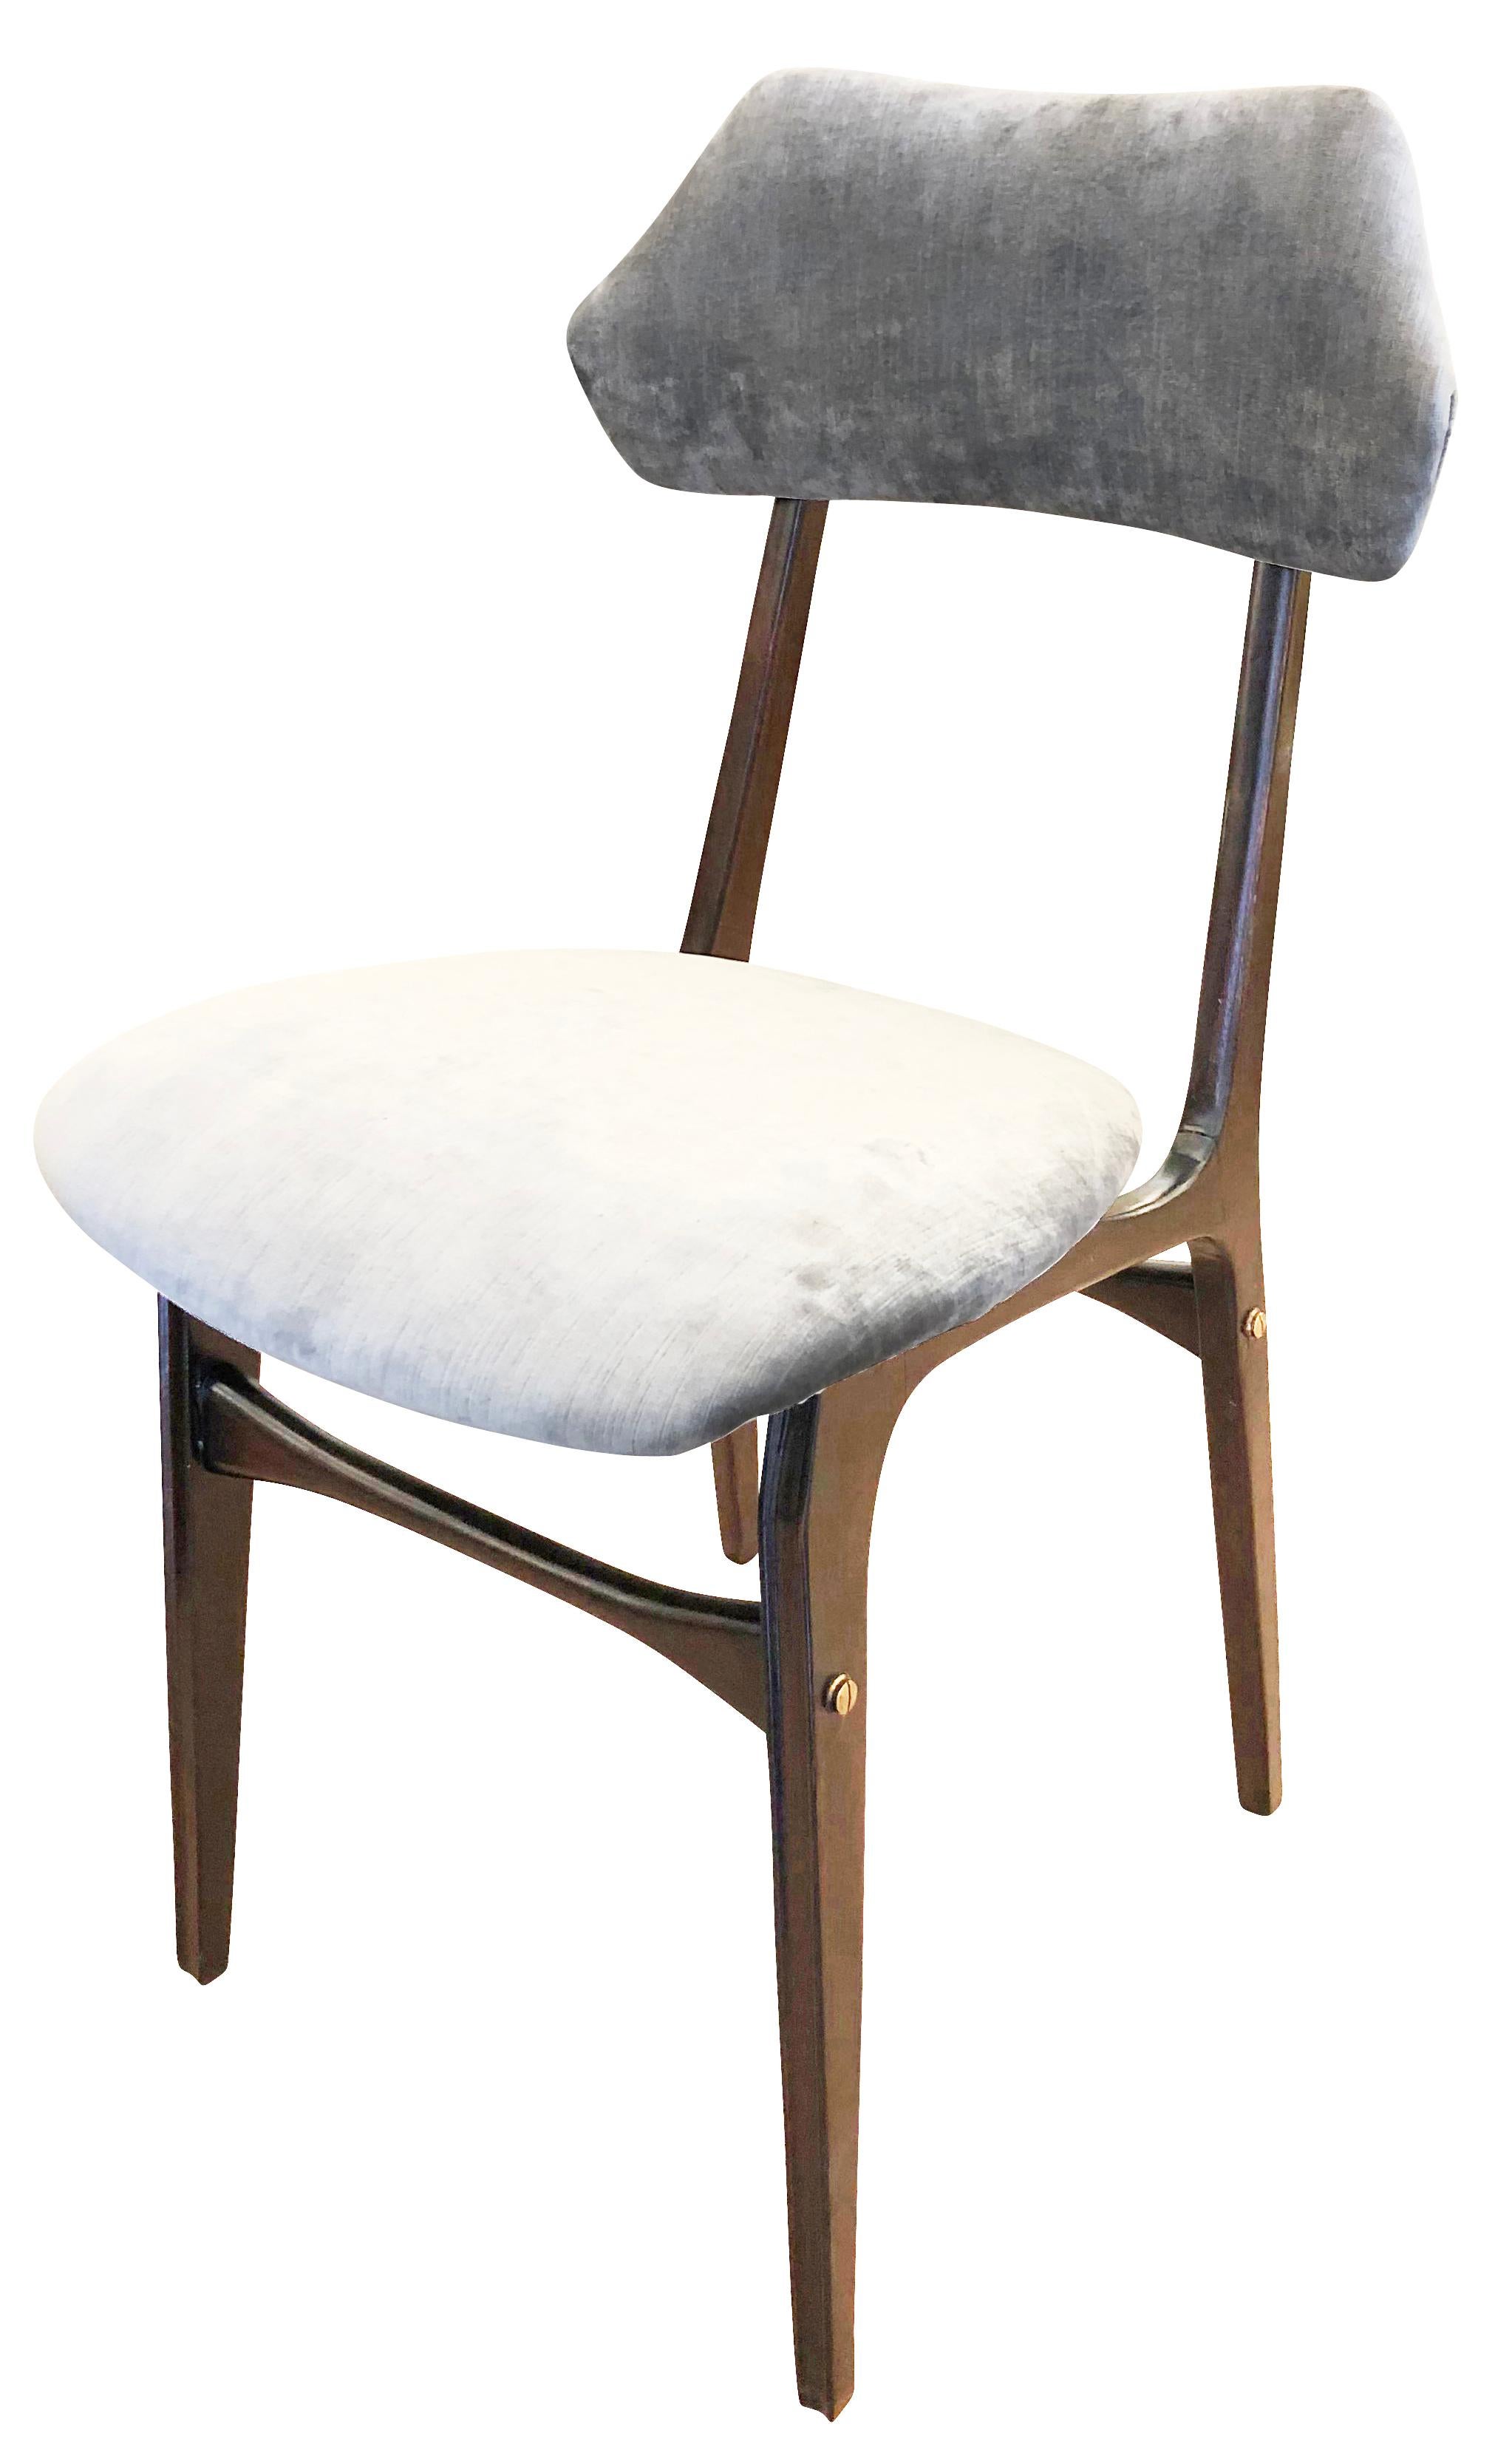 Set of four Italian midcentury chairs in the manner of Ico Parisi with sculptural wood frames.

Condition: Frames have been restored. One has been re-covered for display purposes and the others still have the original fabric

Measures: Width